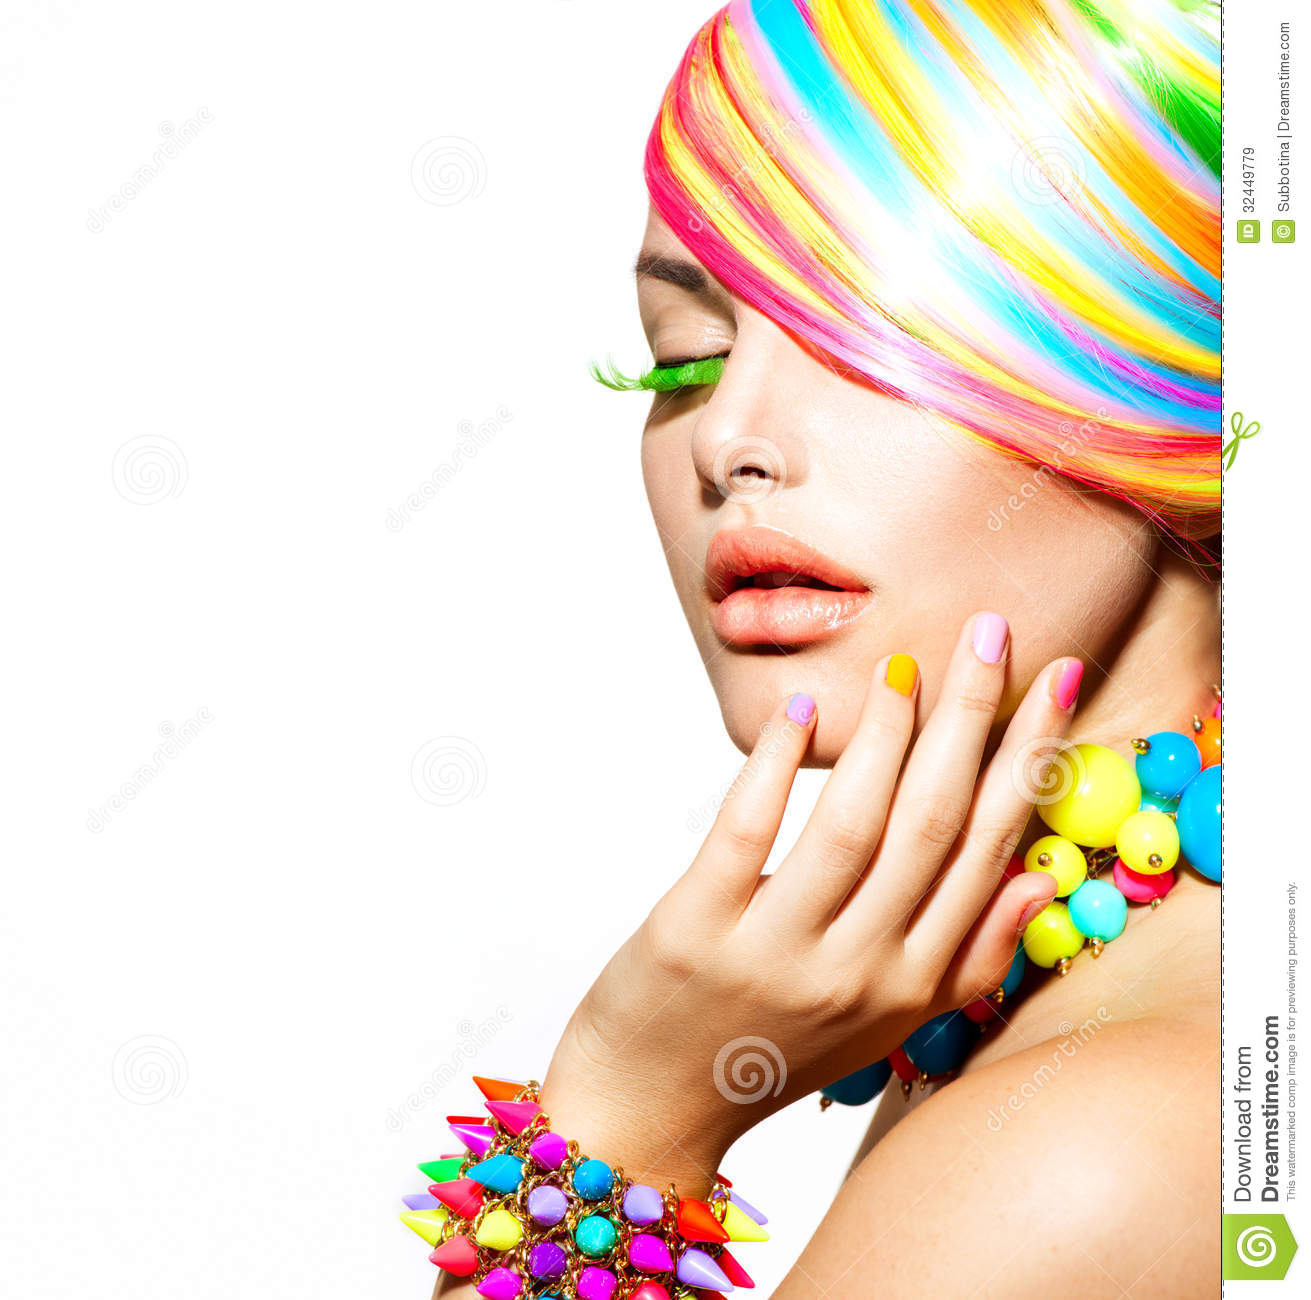 Clipart Hair And Makeup Colorful Makeup Hair And